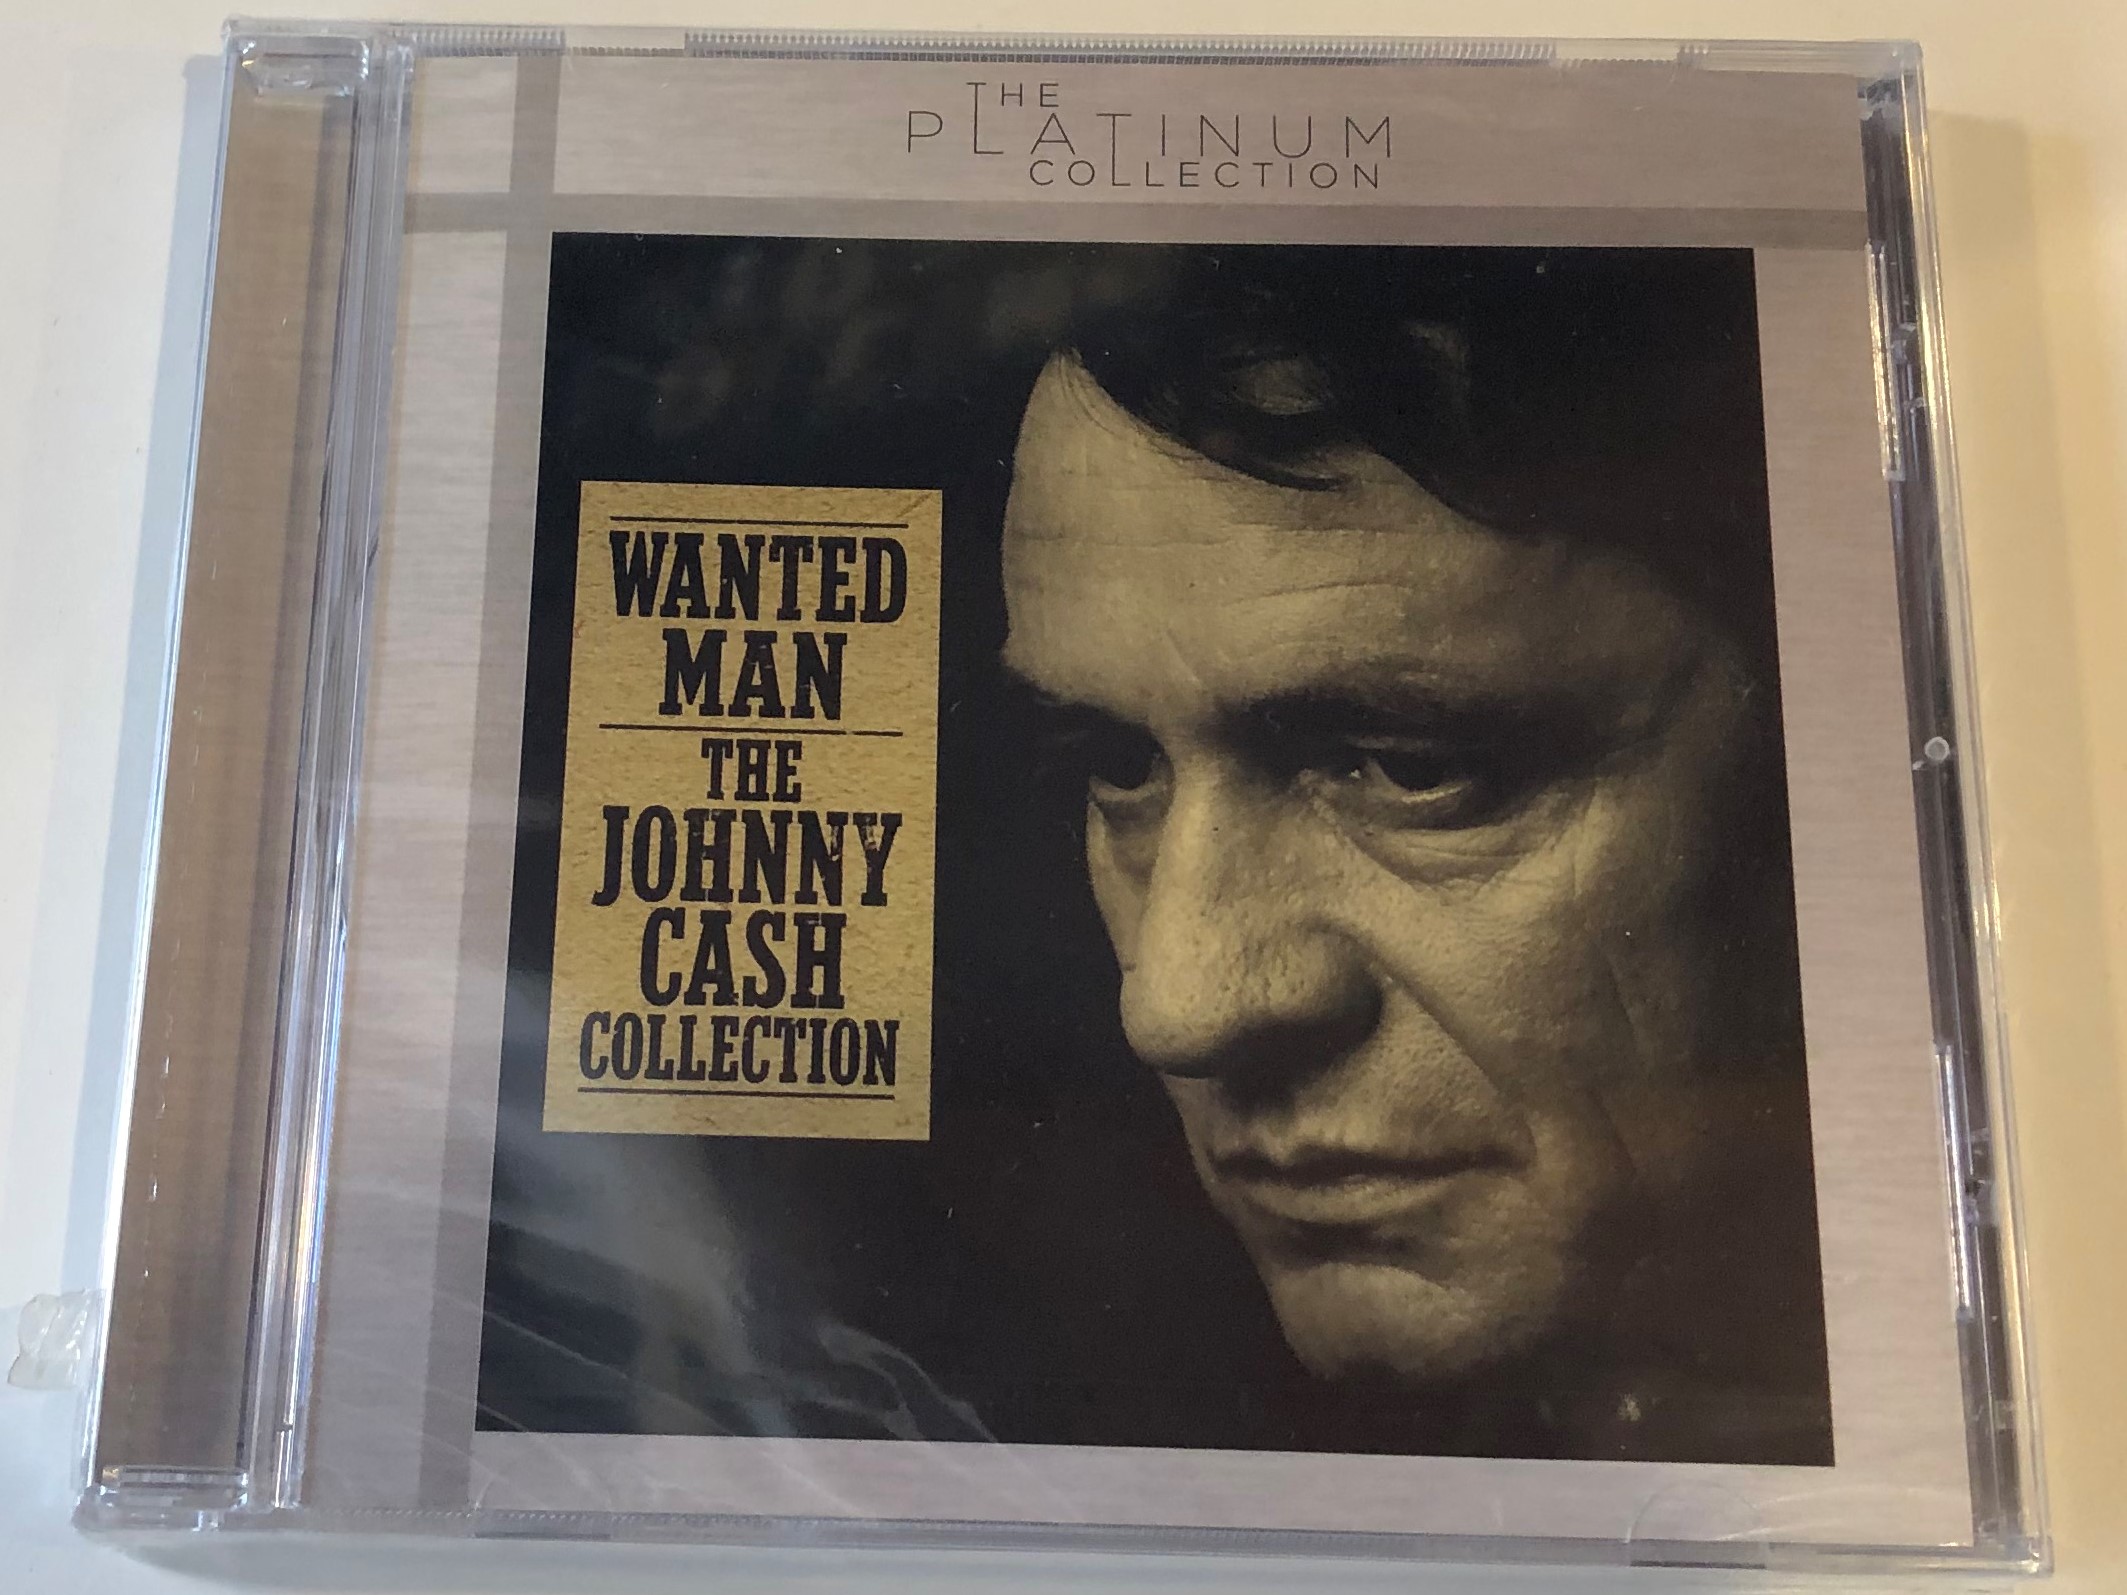 the-platinum-collection-wanted-man-the-johnny-cash-collection-sony-music-audio-cd-2008-88883712272-1-.jpg